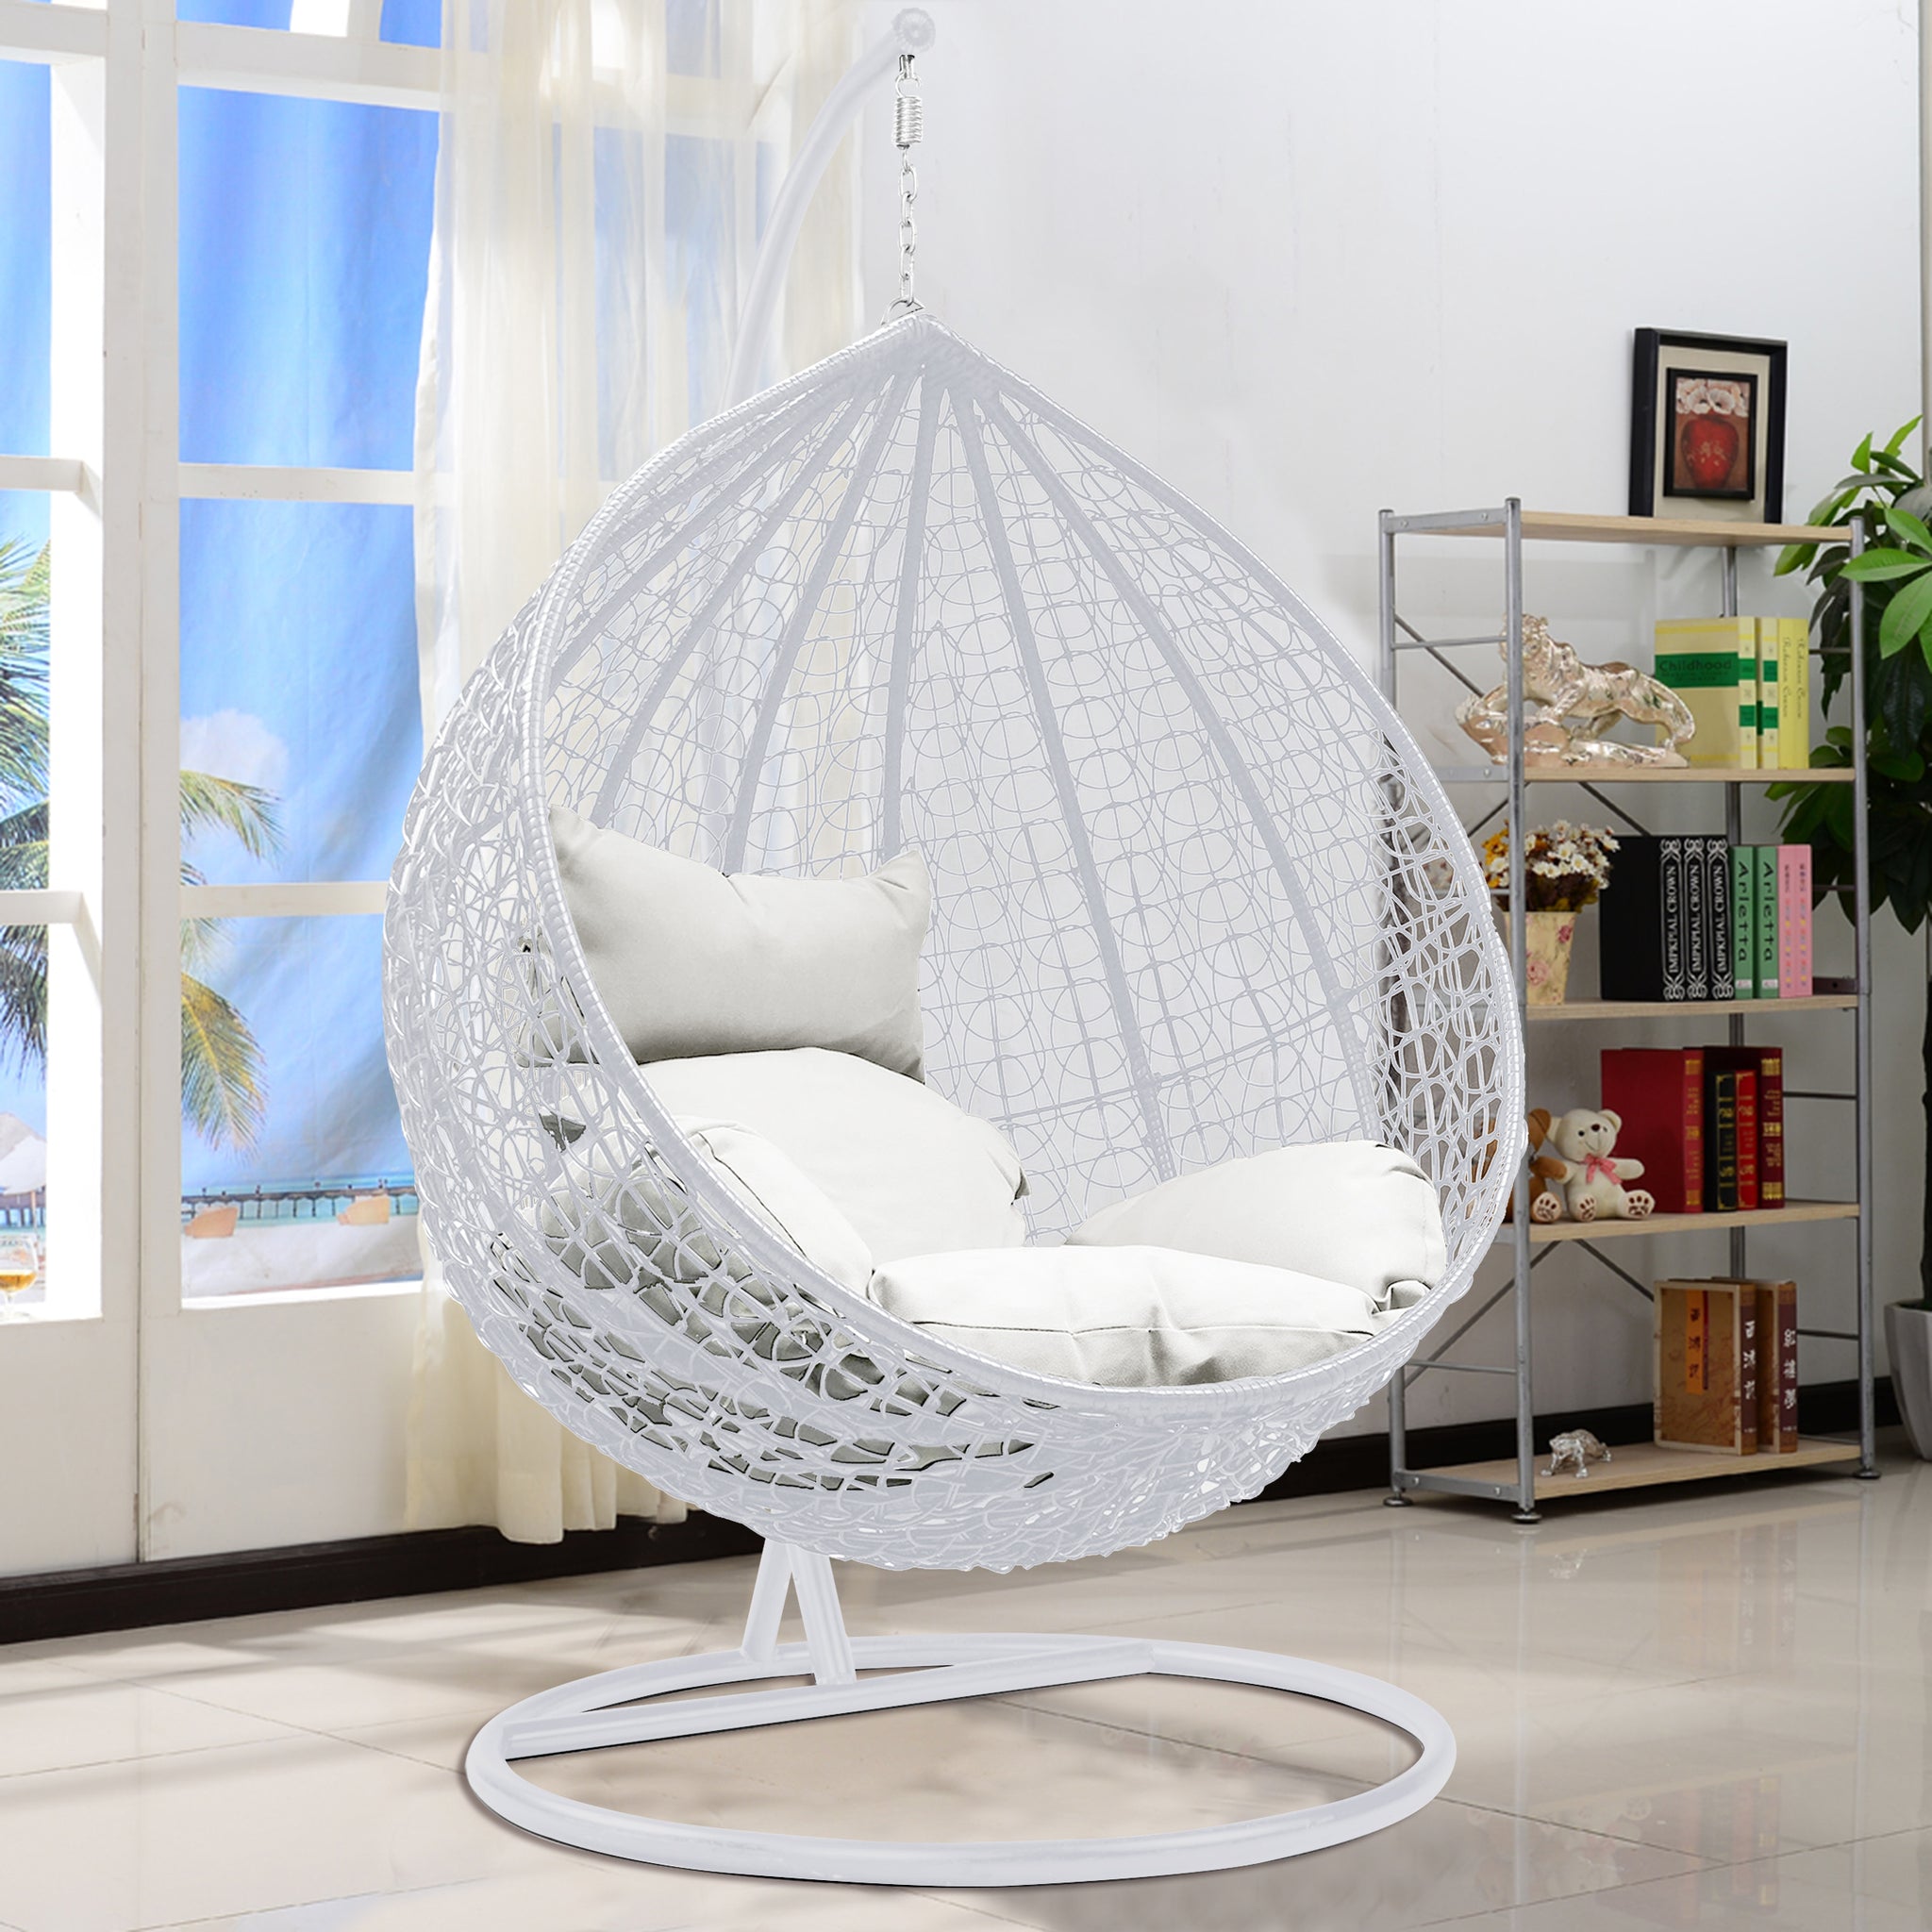 hanging egg swing, hanging egg chairs for bedroom, egg chair swing, b&m egg chairs, egg chair with speakers home, DHS egg chair 2022, yellow egg chair, egg chair outside studio, hanging egg chair, egg style chair, double hanging garden chair, indoor egg chair with legs, double seat egg chair, DHS egg chair with stand, floor standing egg chair, black egg chair, outdoor oval egg chair